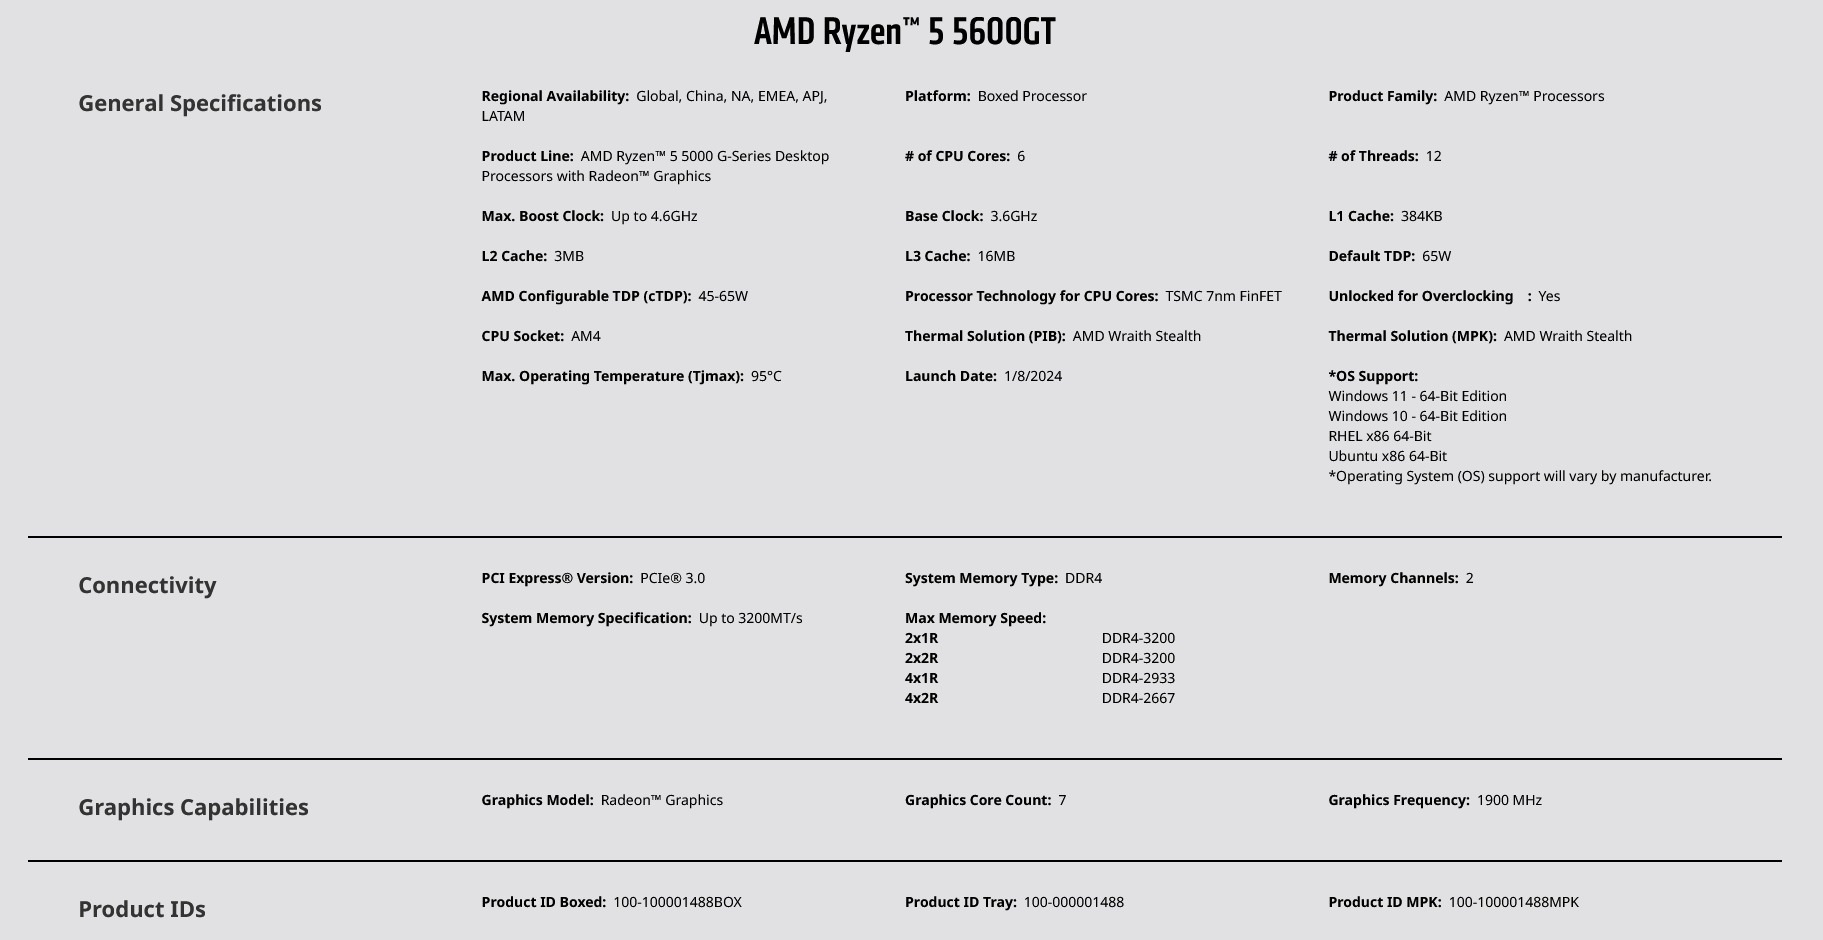 A large marketing image providing additional information about the product AMD Ryzen 5 5600GT 6 Core 12 Thread Up To 4.6GHz AM4 - With Wraith Stealth Cooler - Additional alt info not provided